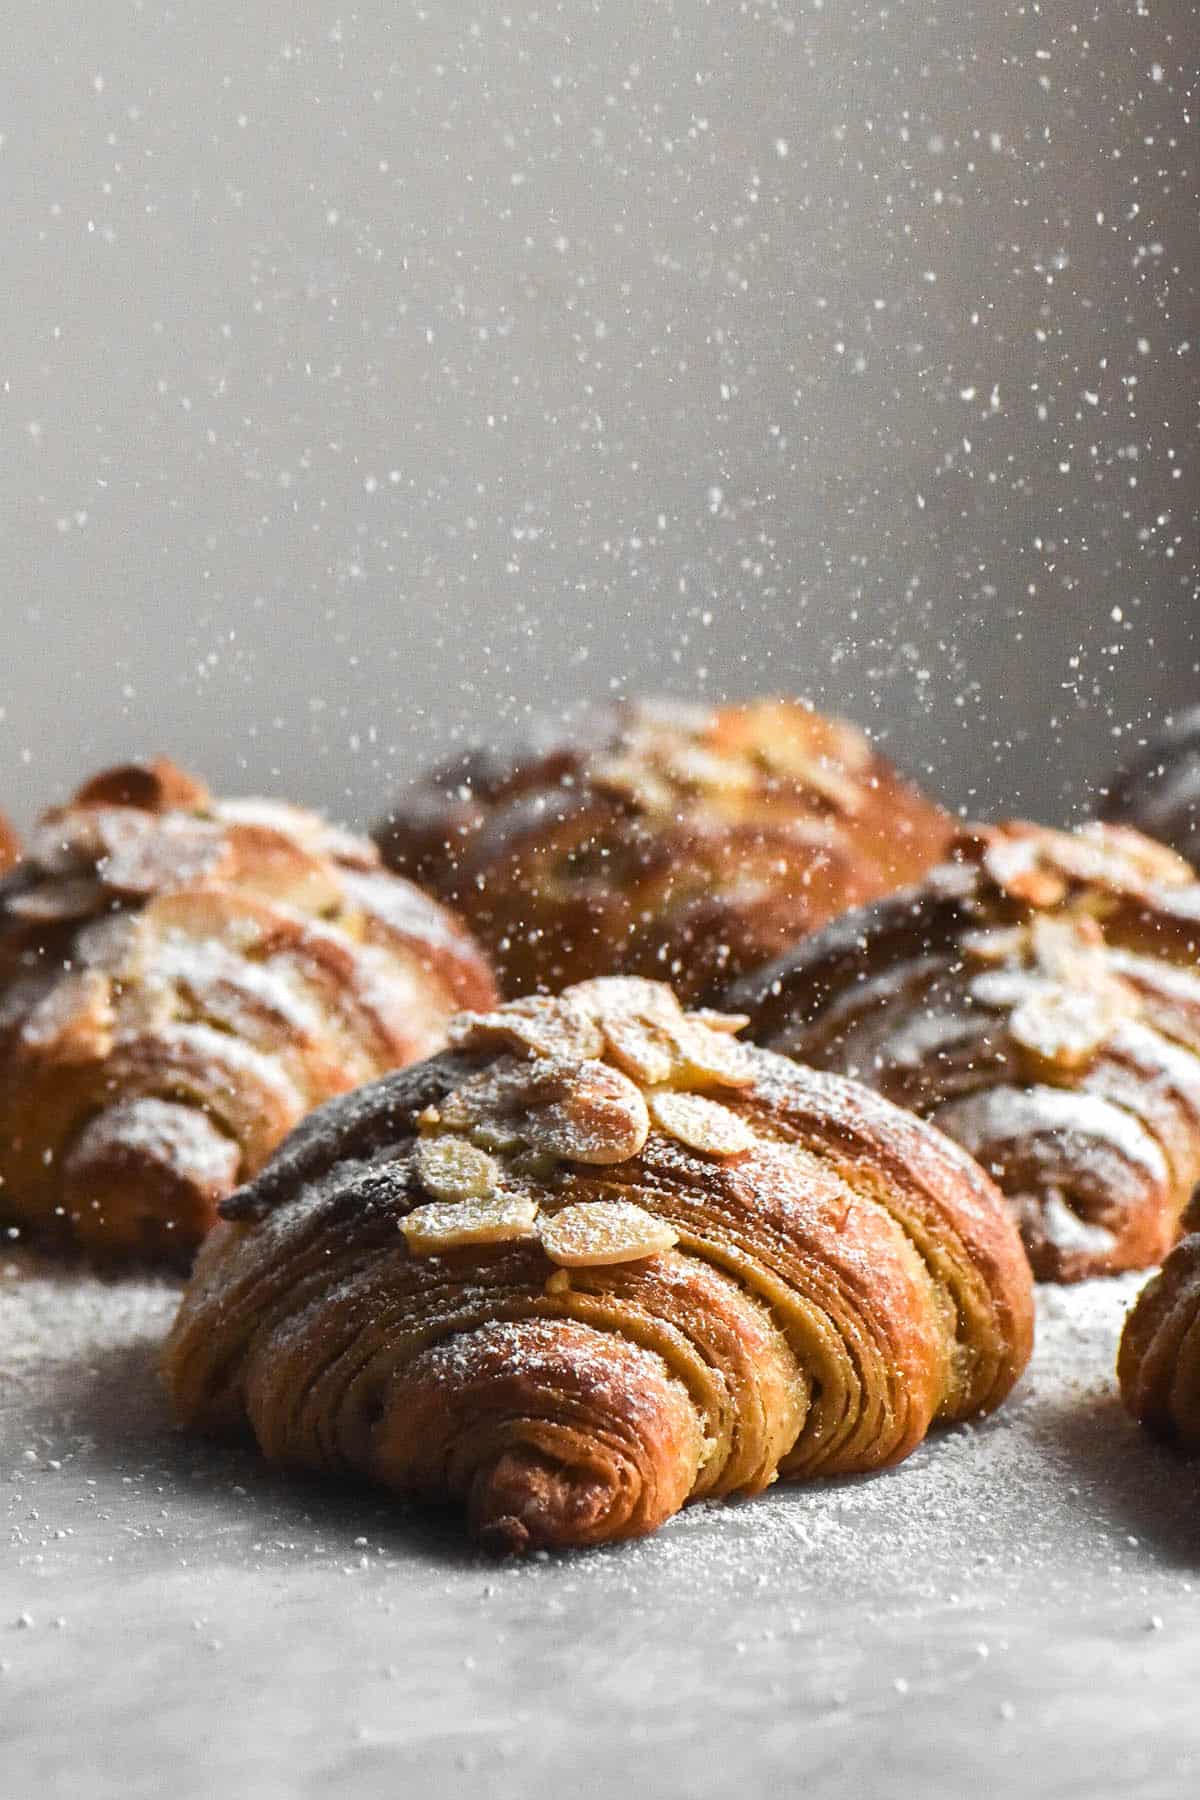 A side on view of a group of gluten free almond croissants being sprinkled with icing sugar. The croissants sit atop a white marble table against a white background, and the sprinkle of icing sugar drops down like flakes of snow. The croissants face the camera to reveal their flaky layers